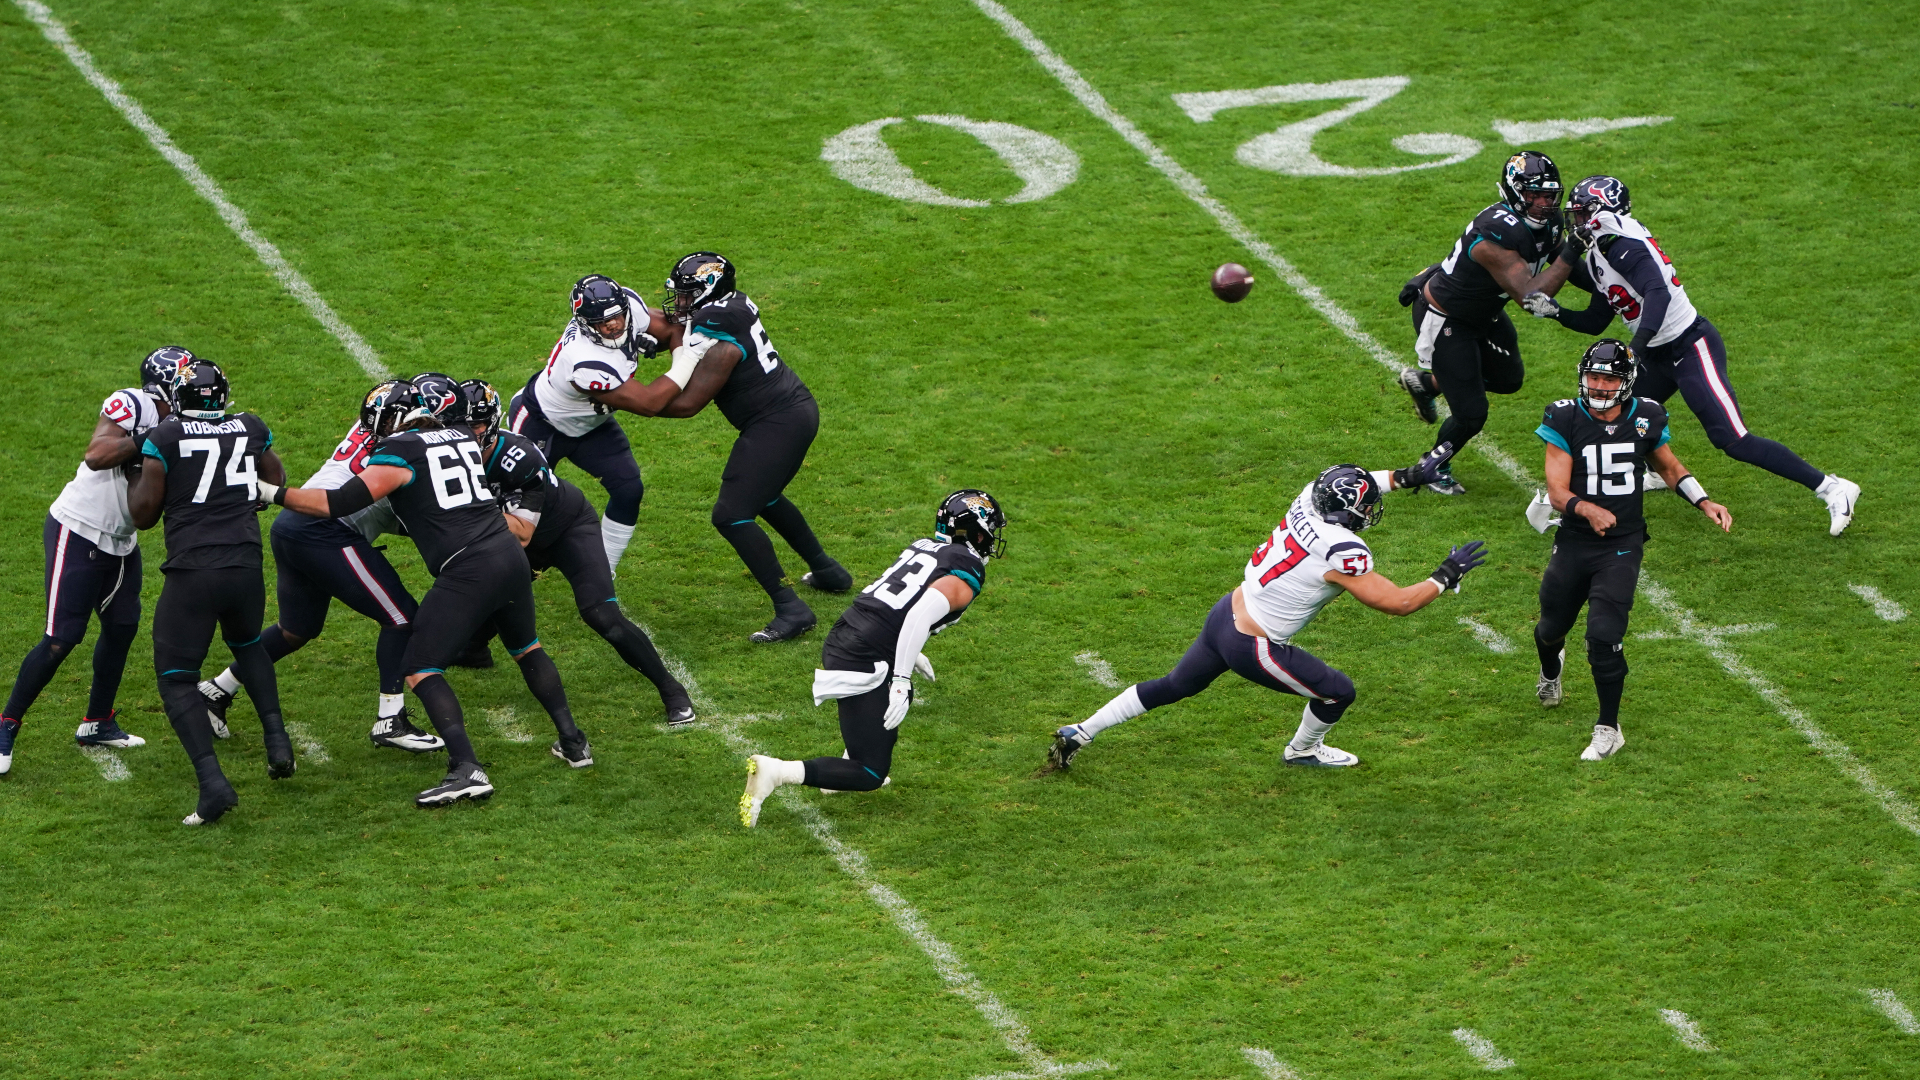 Action shot of 12 NFL players against the bright green pitch and 20 line during Houston Texans at Jacksonville Jaguars game. 